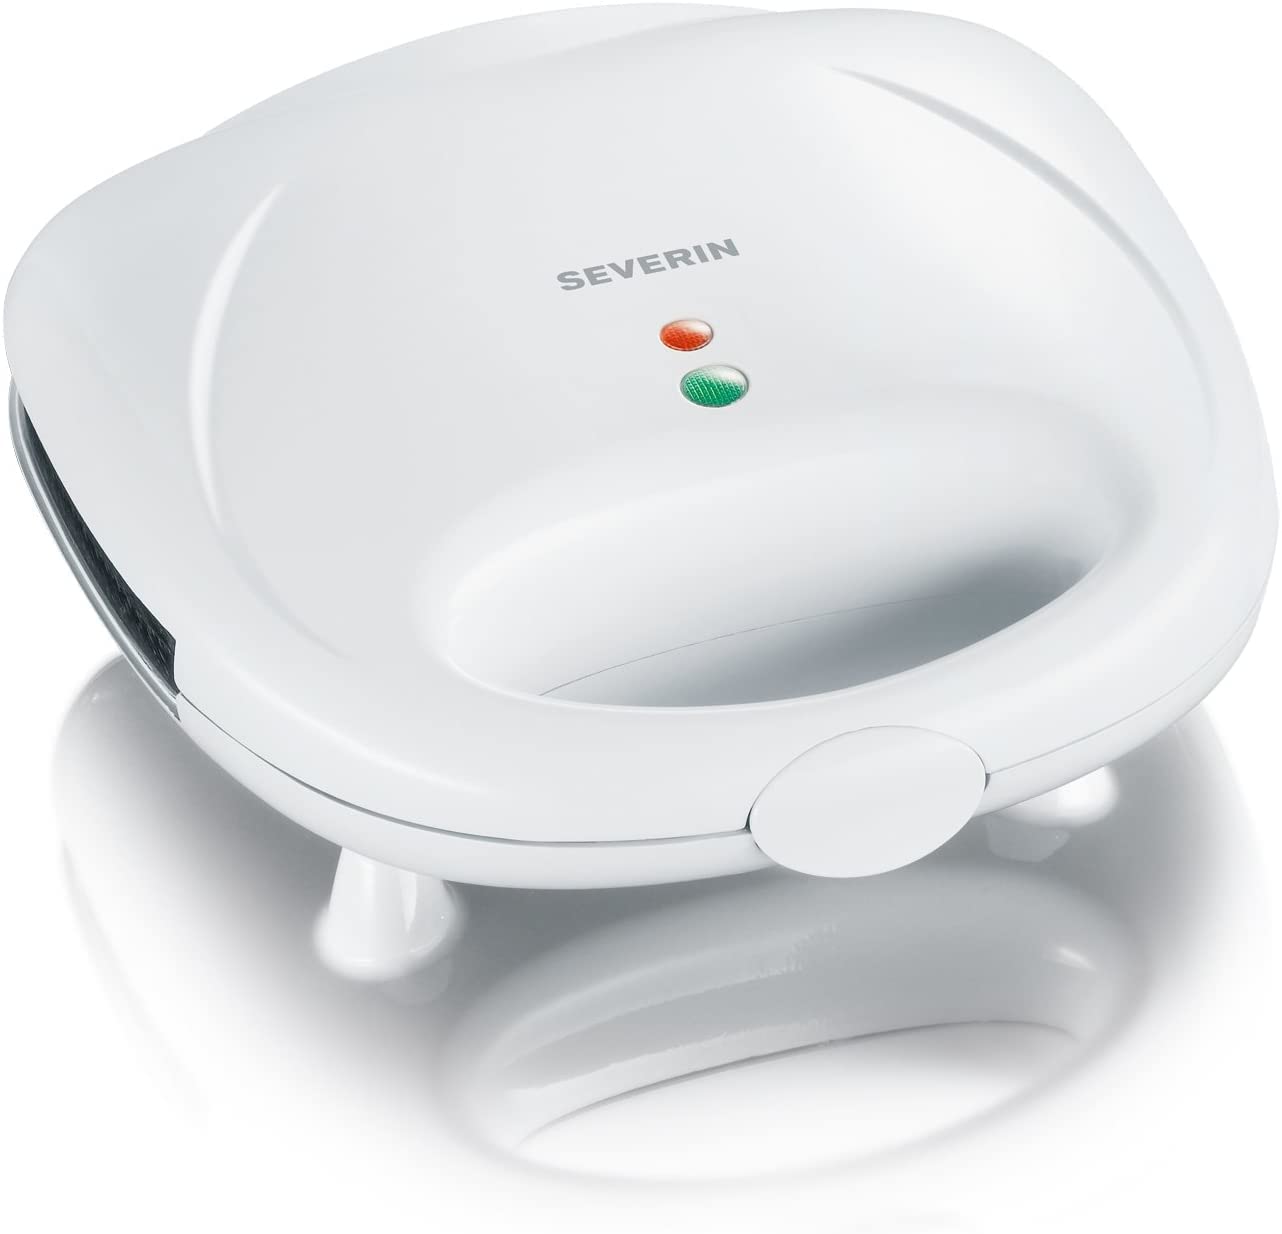 Severin SA 2967 Sandwich Maker with Grill Plates, White